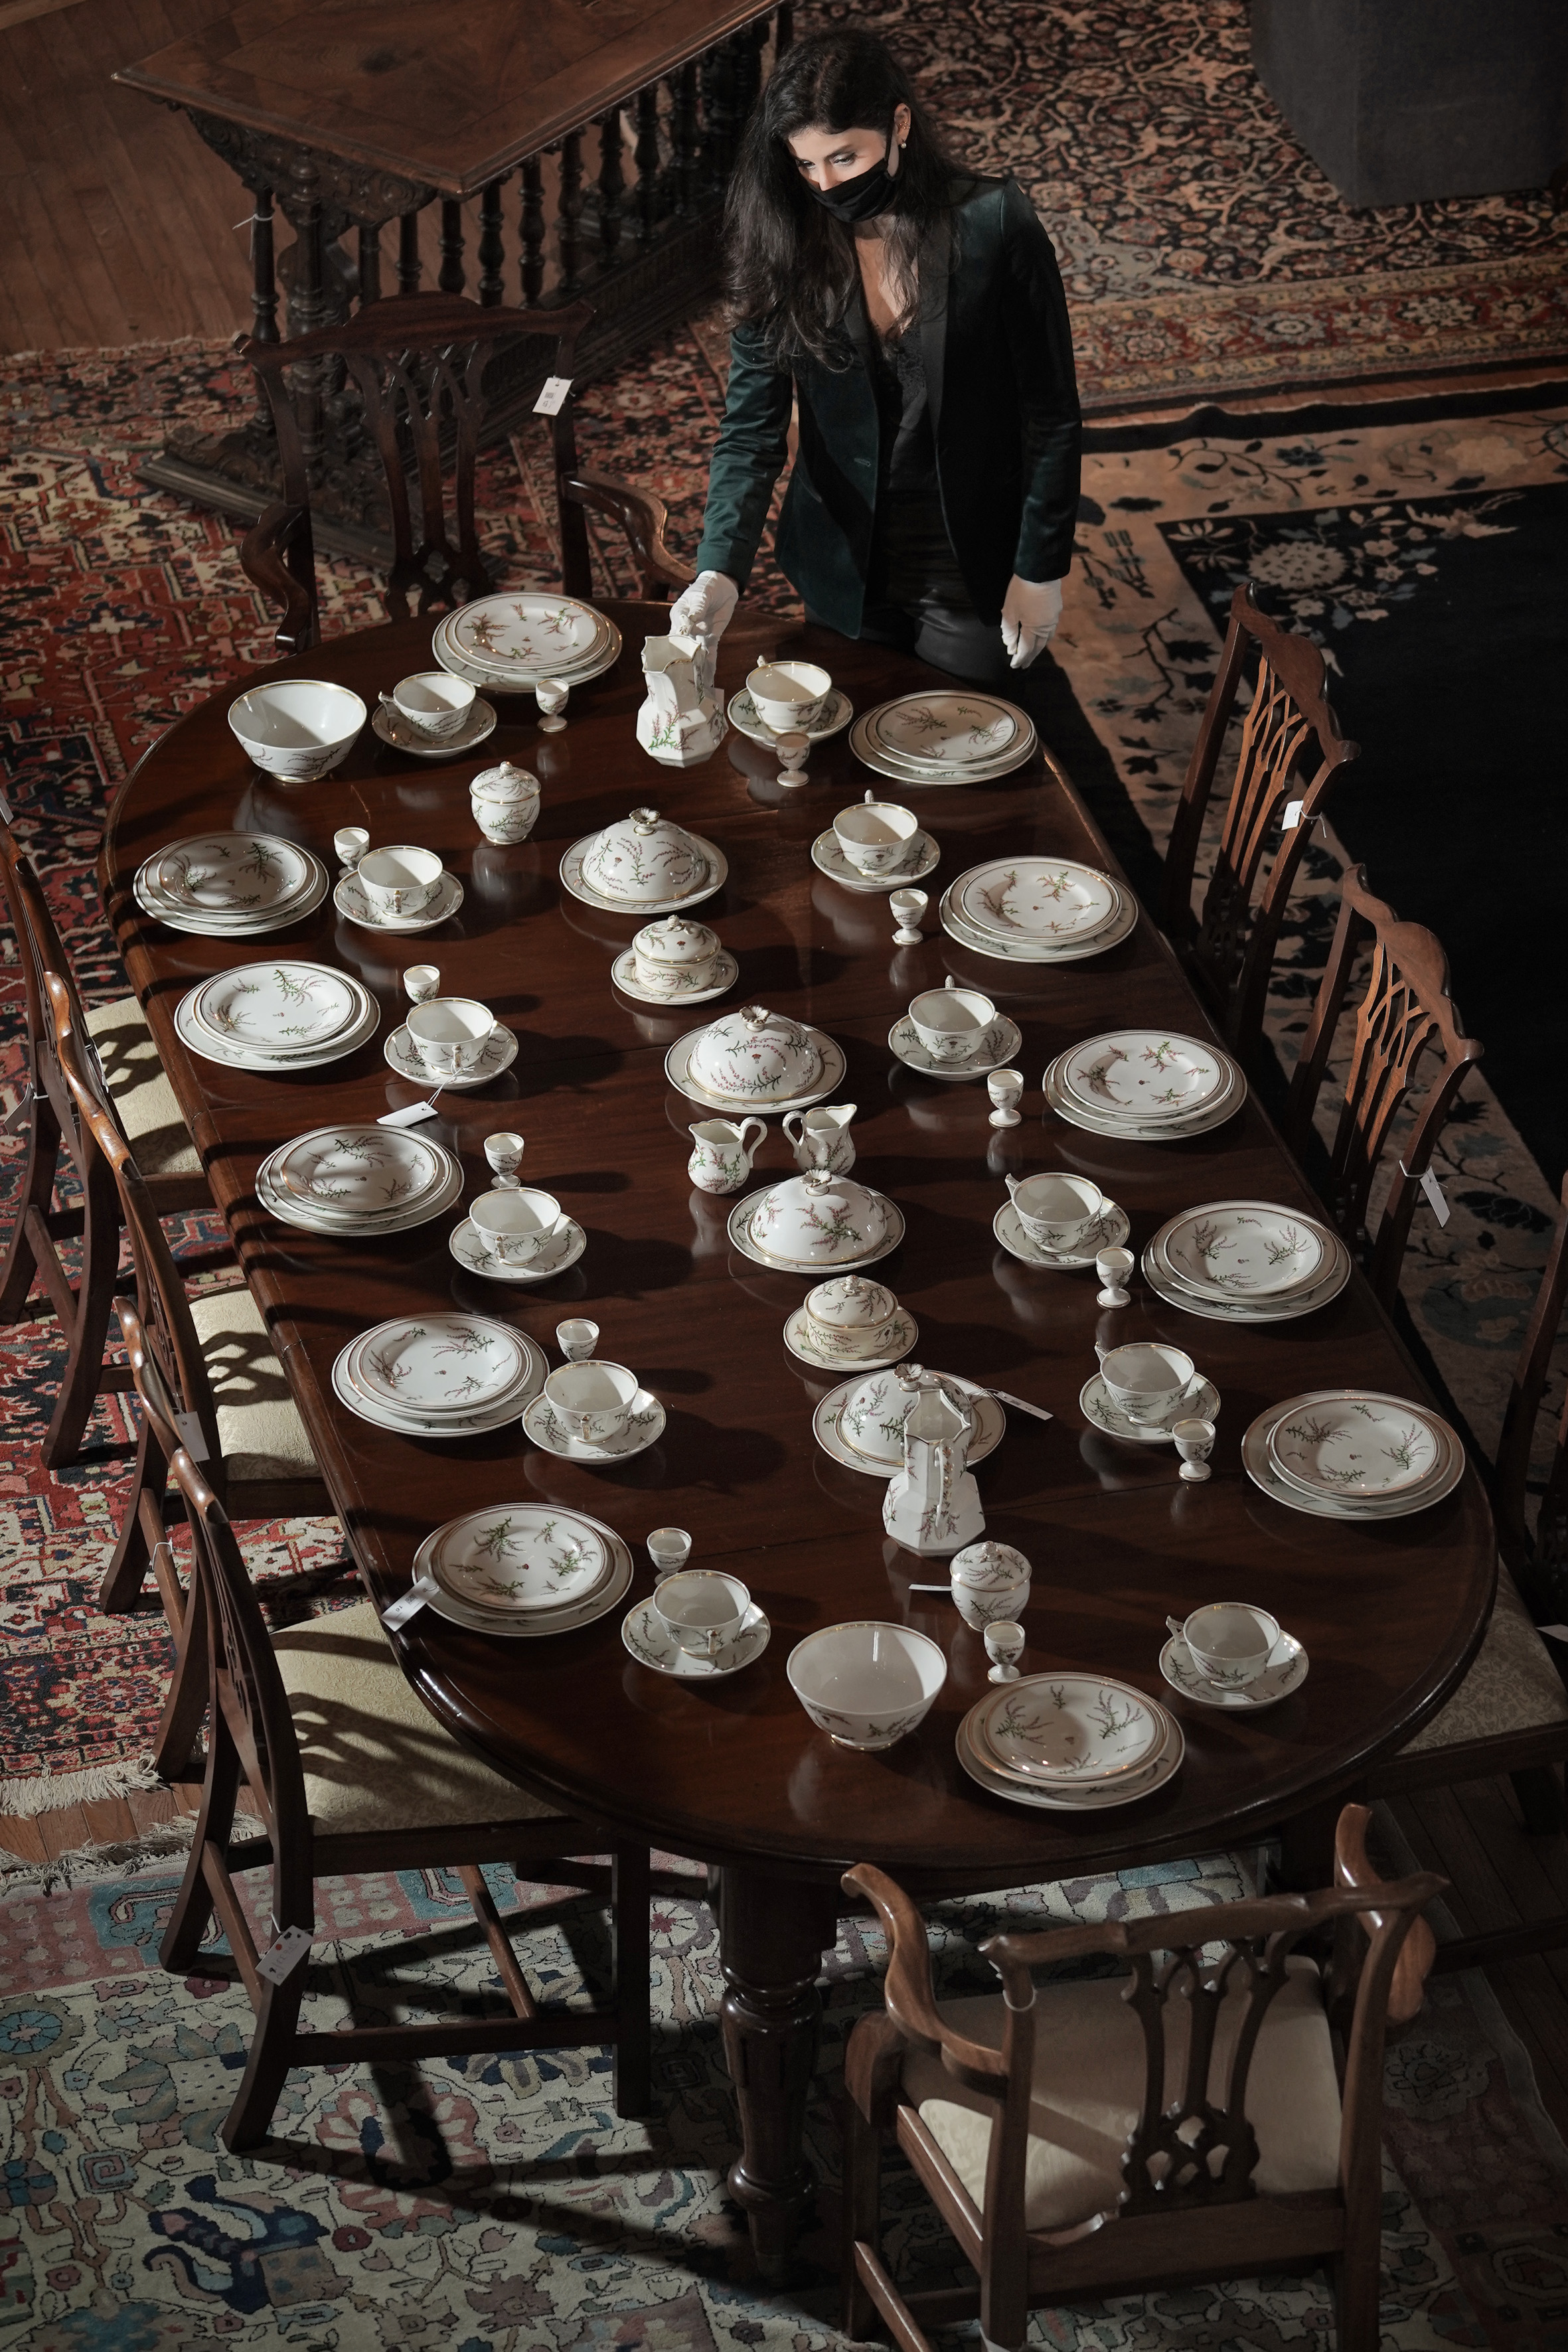 The breakfast set comprises nearly 300 pieces (Stewart Attwood/PA)